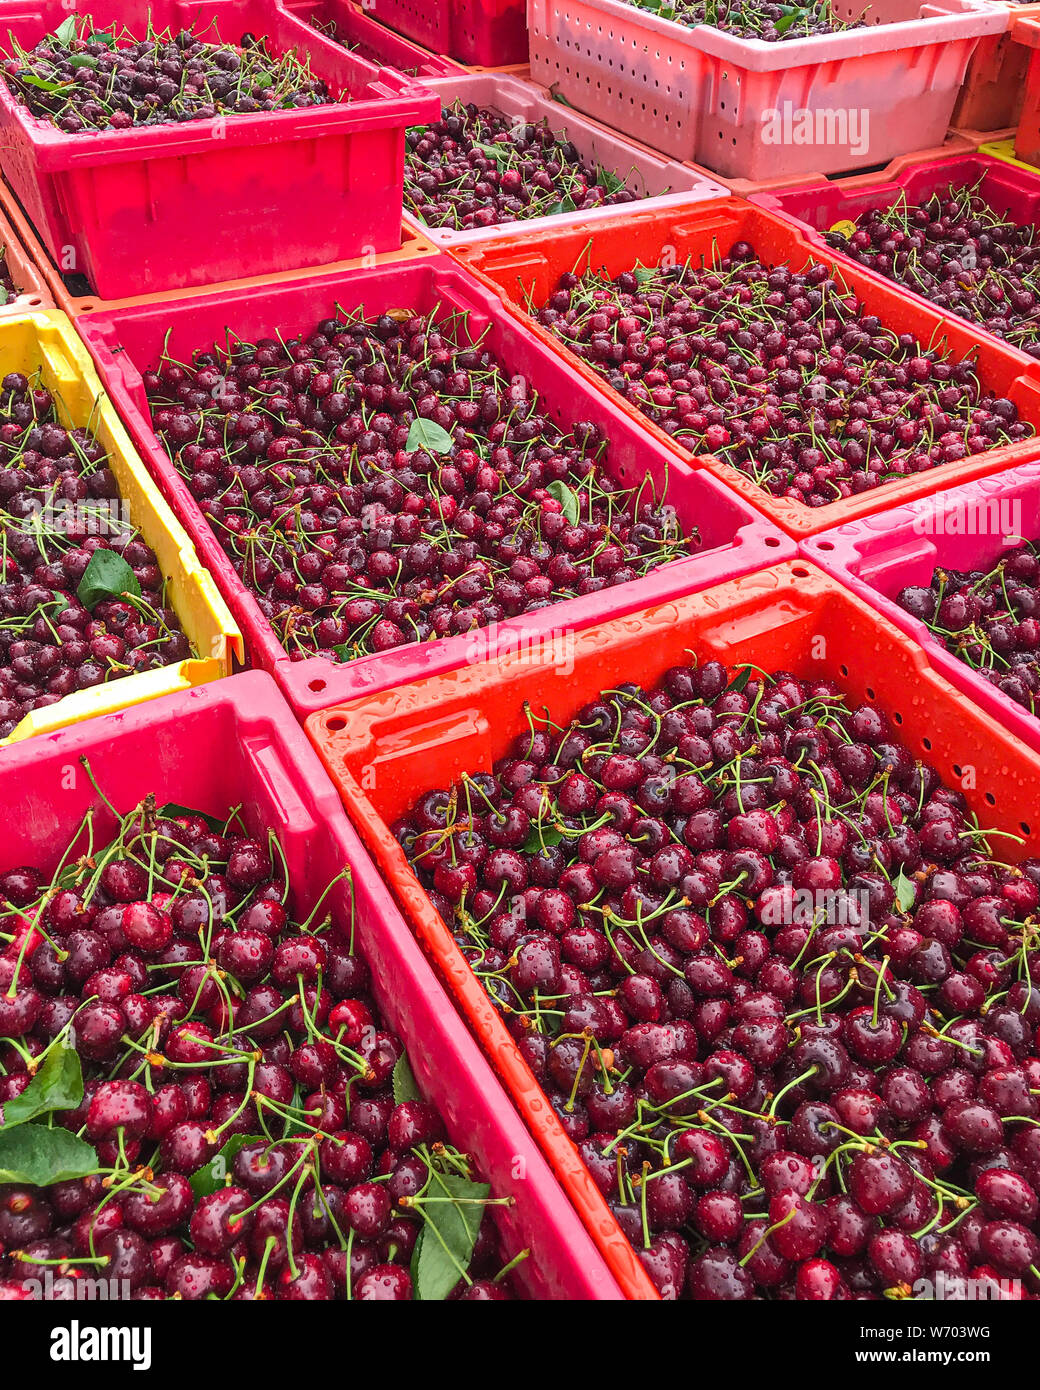 Boxes full of fresh Washington State cherries ready for processing at plants in the Chelan County in Washington State ready for sale to the consumer Stock Photo